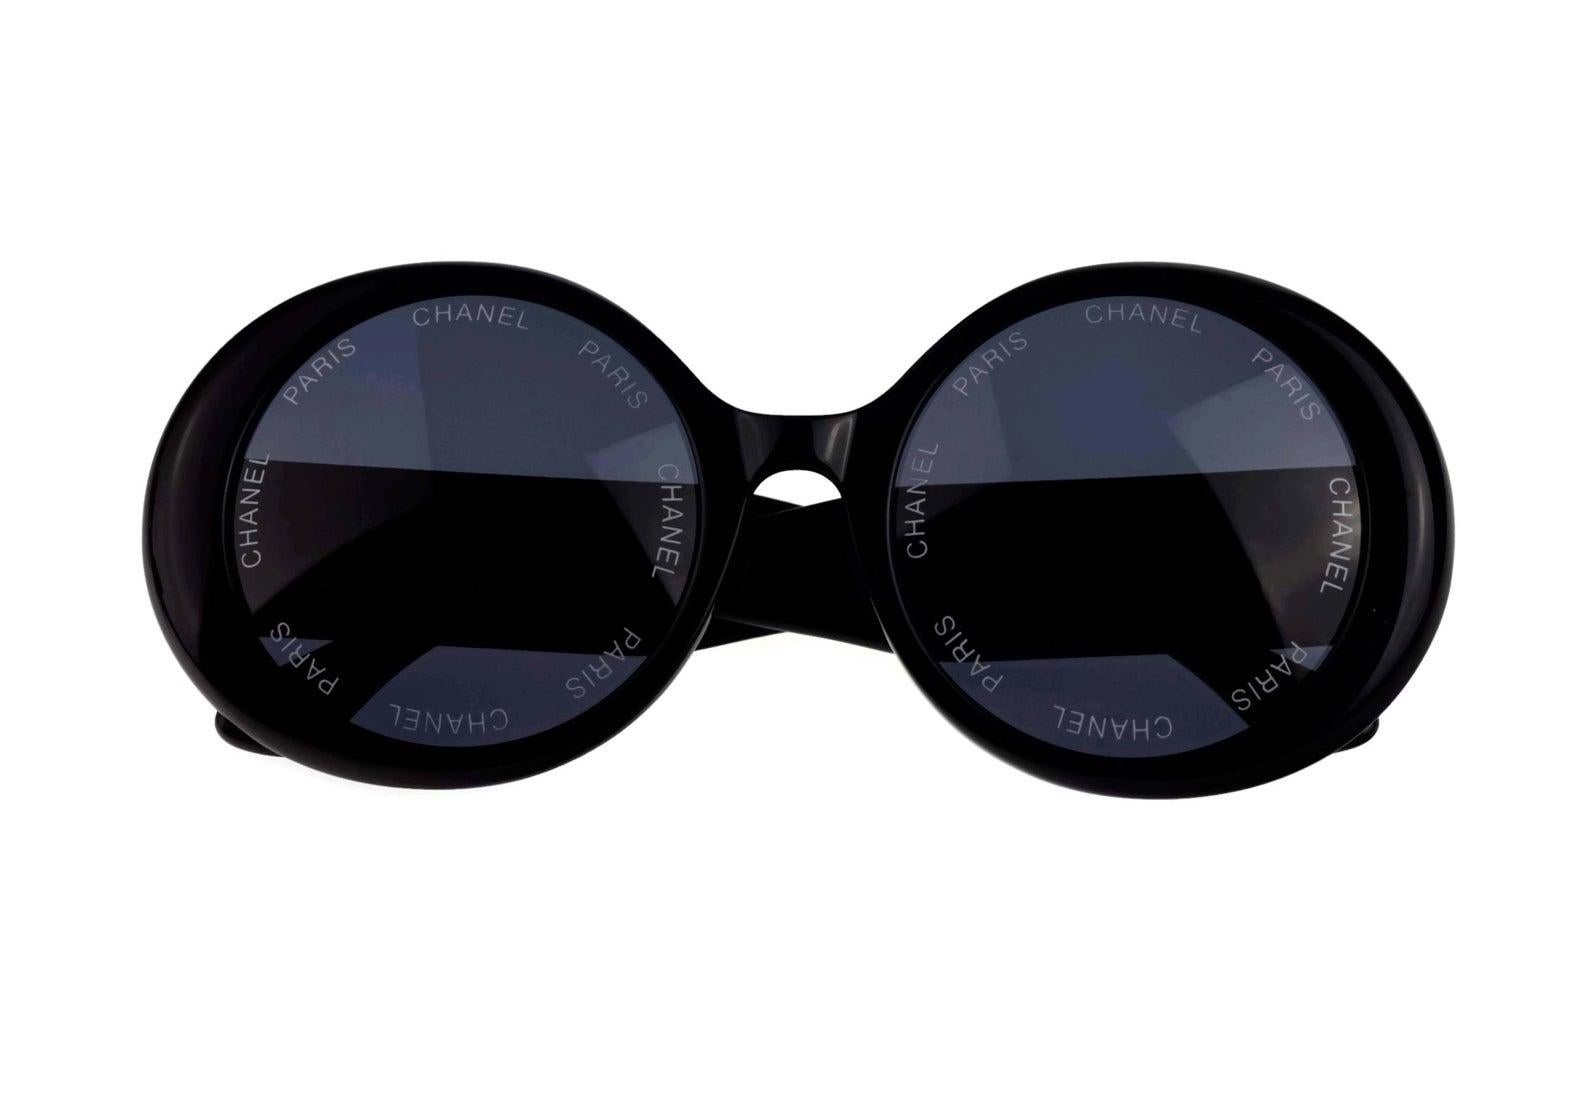 Vintage 1993 Iconic CHANEL PARIS Lens Round Black Sunglasses As Seen On Rihana

Measurements:
Height: 2.36 inches (6 cm)
Frame Width: 5.70 inches (14.5 cm)
Temples: 5.23 inches (13.3 cm)

As seen on Rihanna.
From CHANEL Spring/ Summer 1993